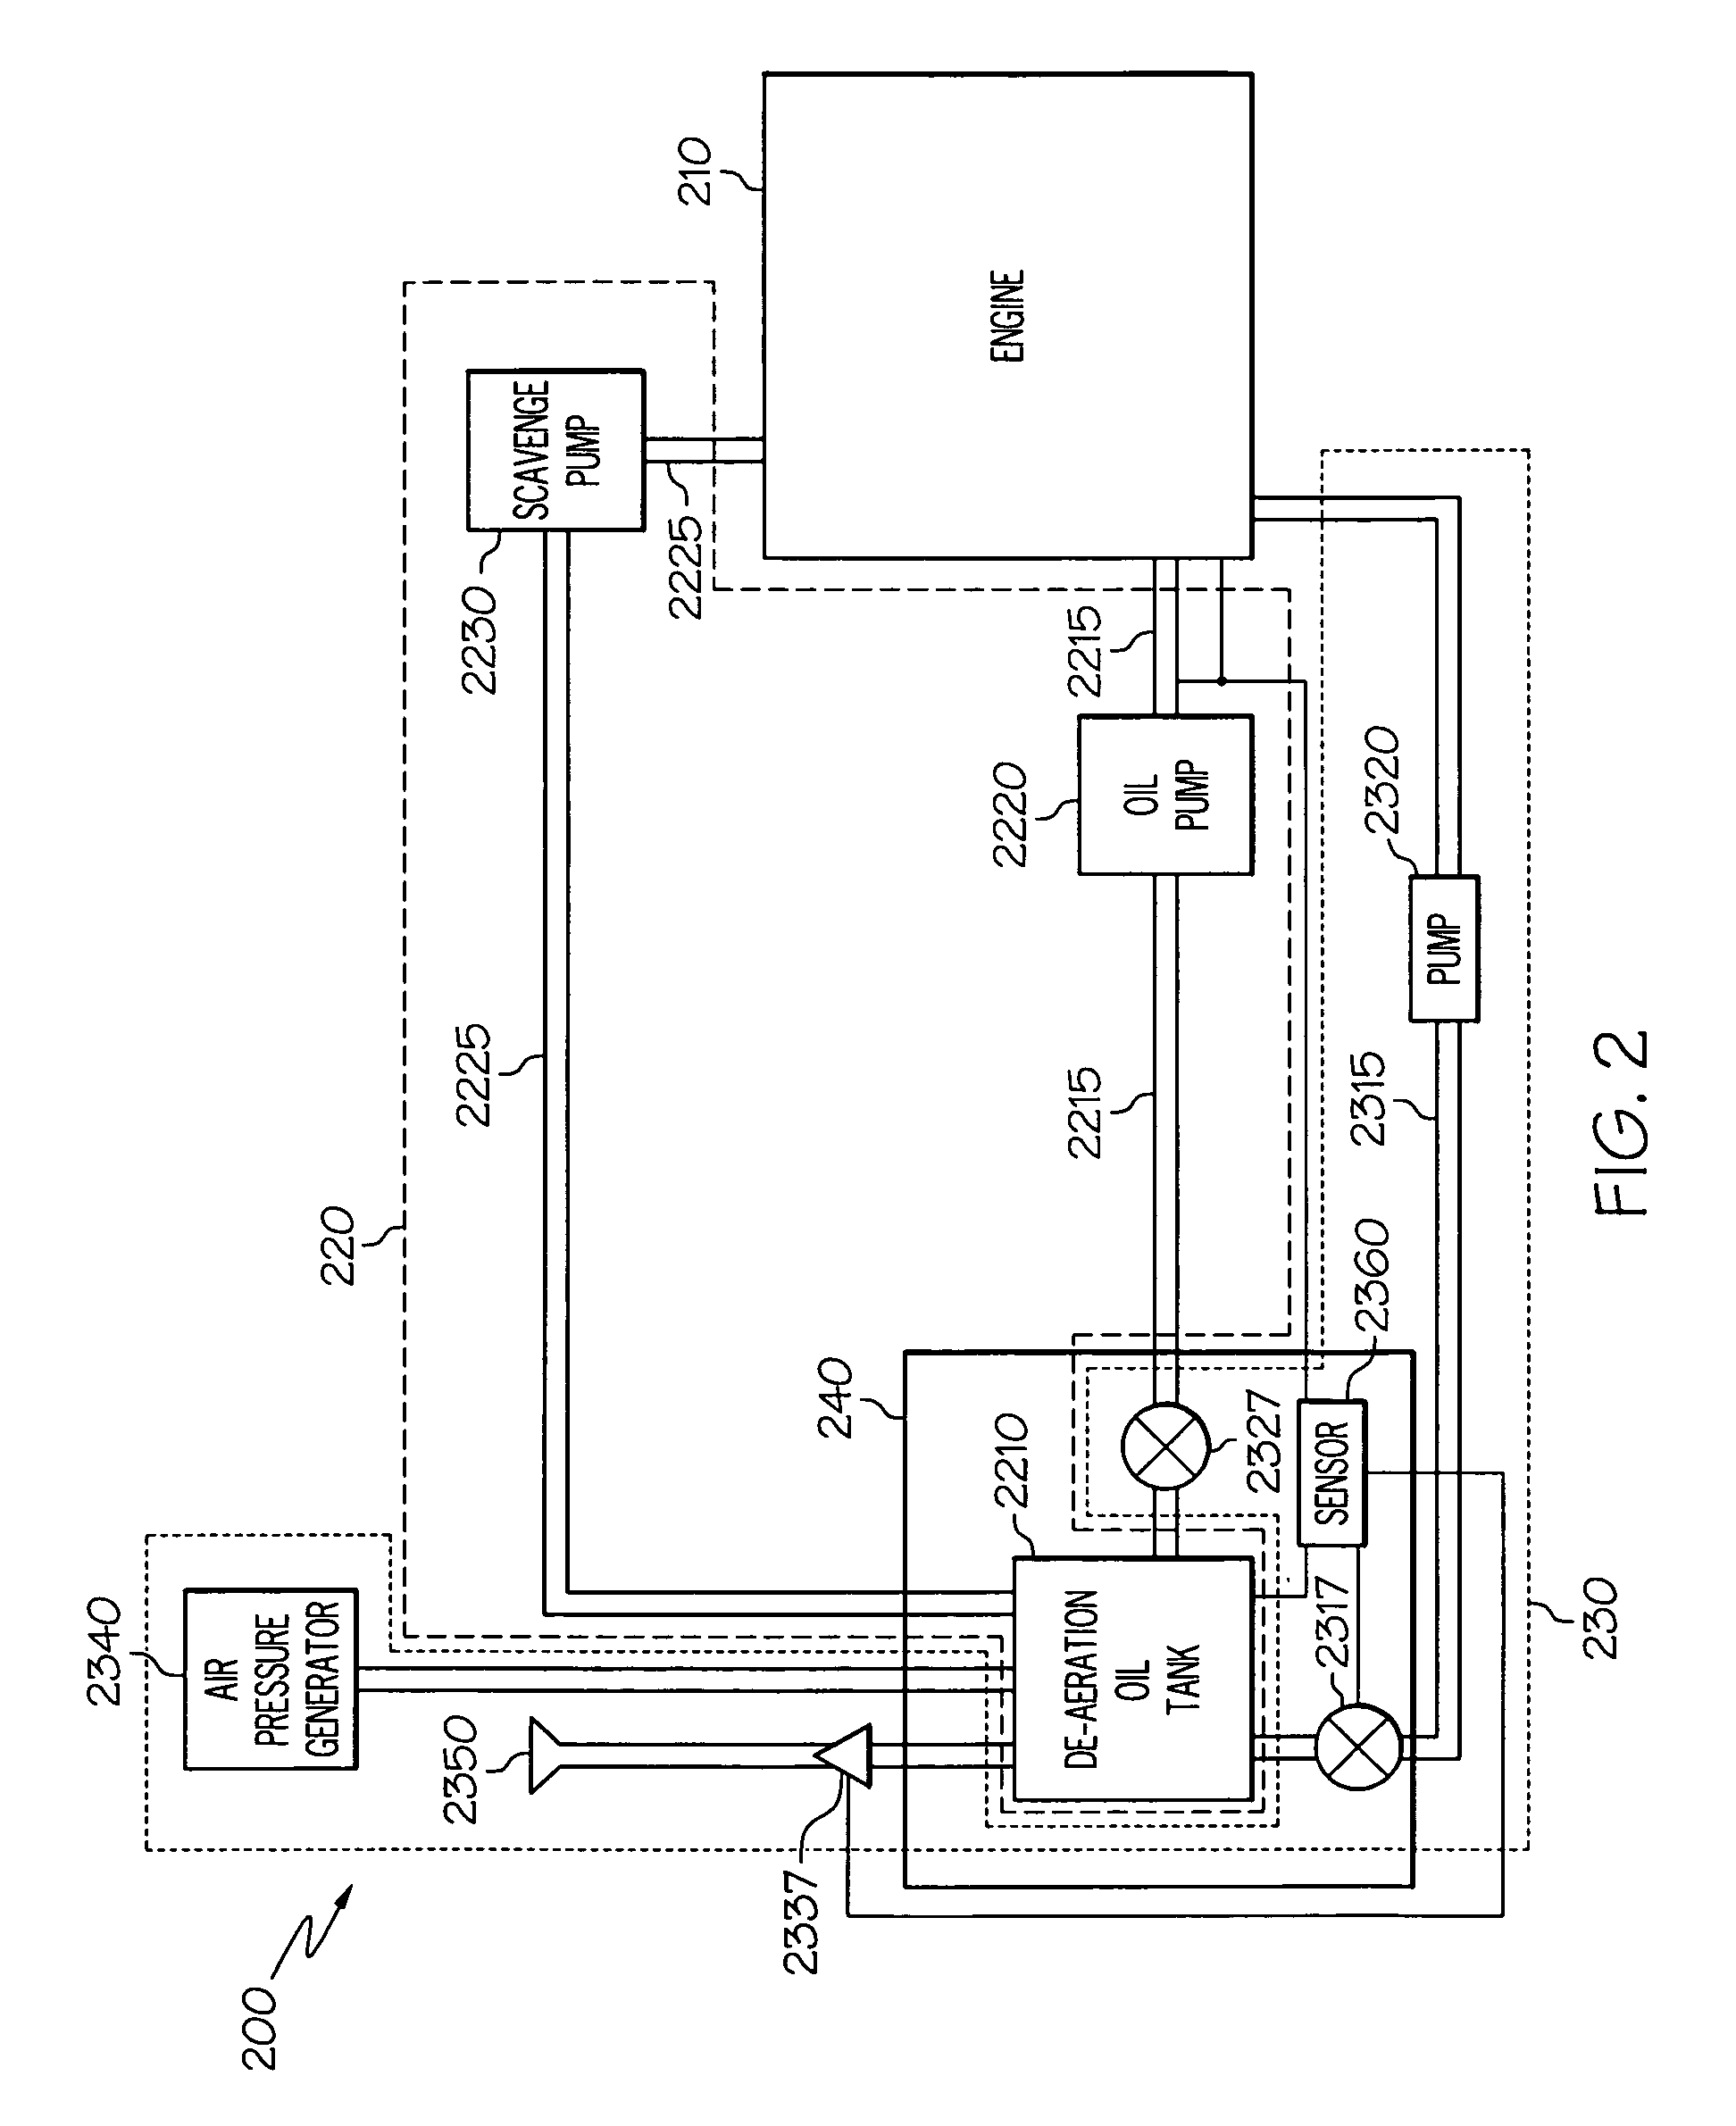 Emergency engine lubrication systems and methods